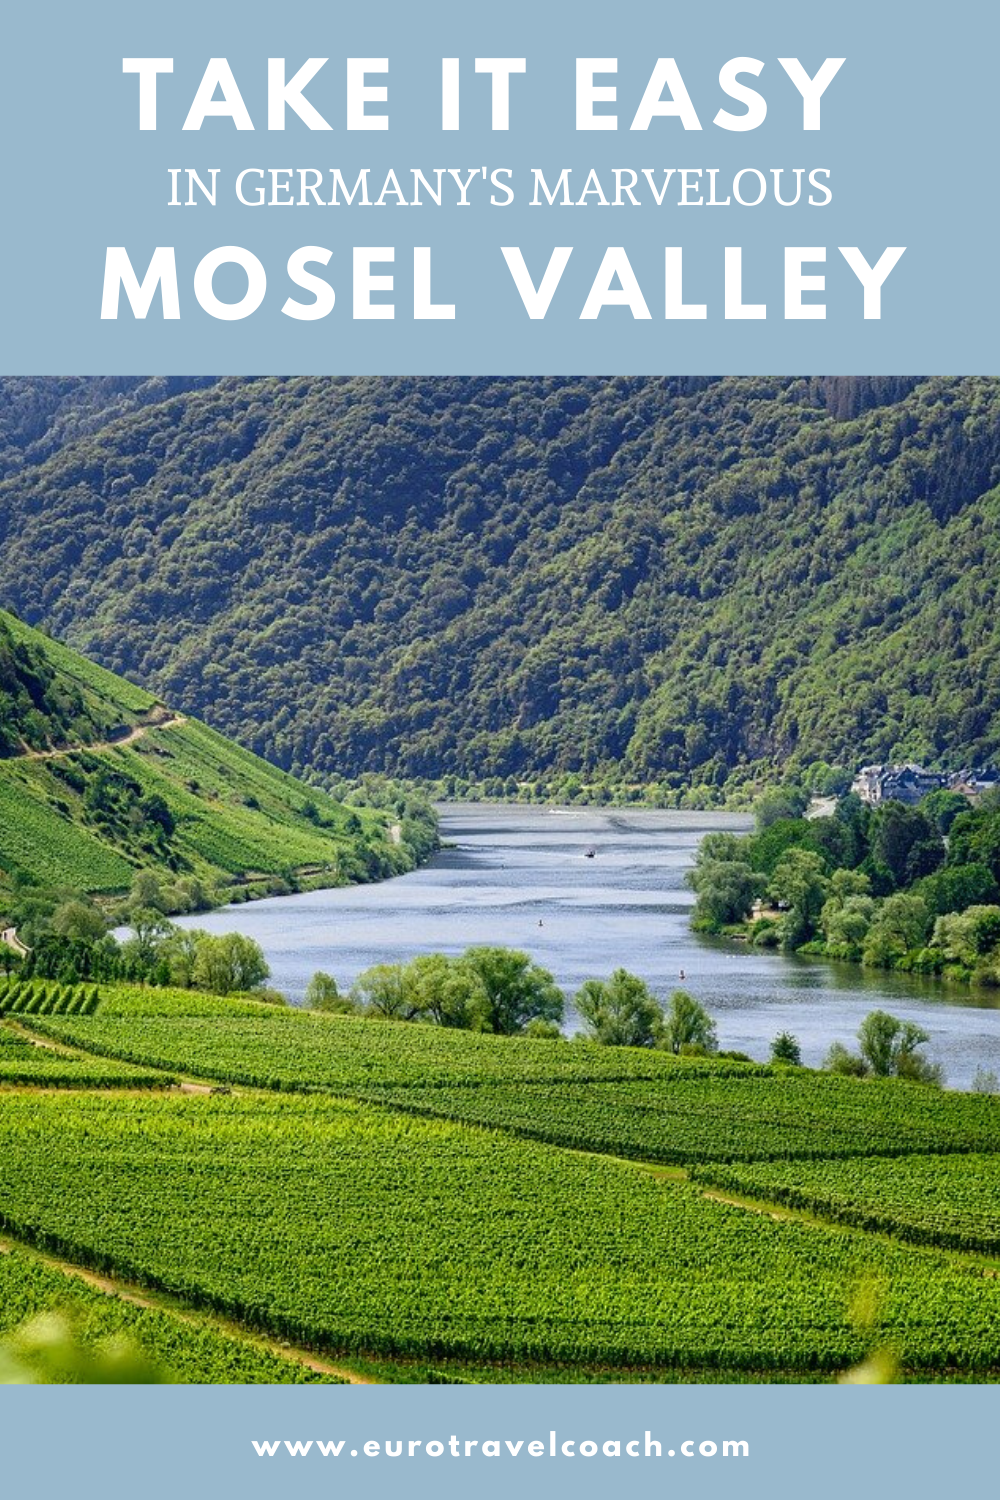 Mosel Valley Itinerary